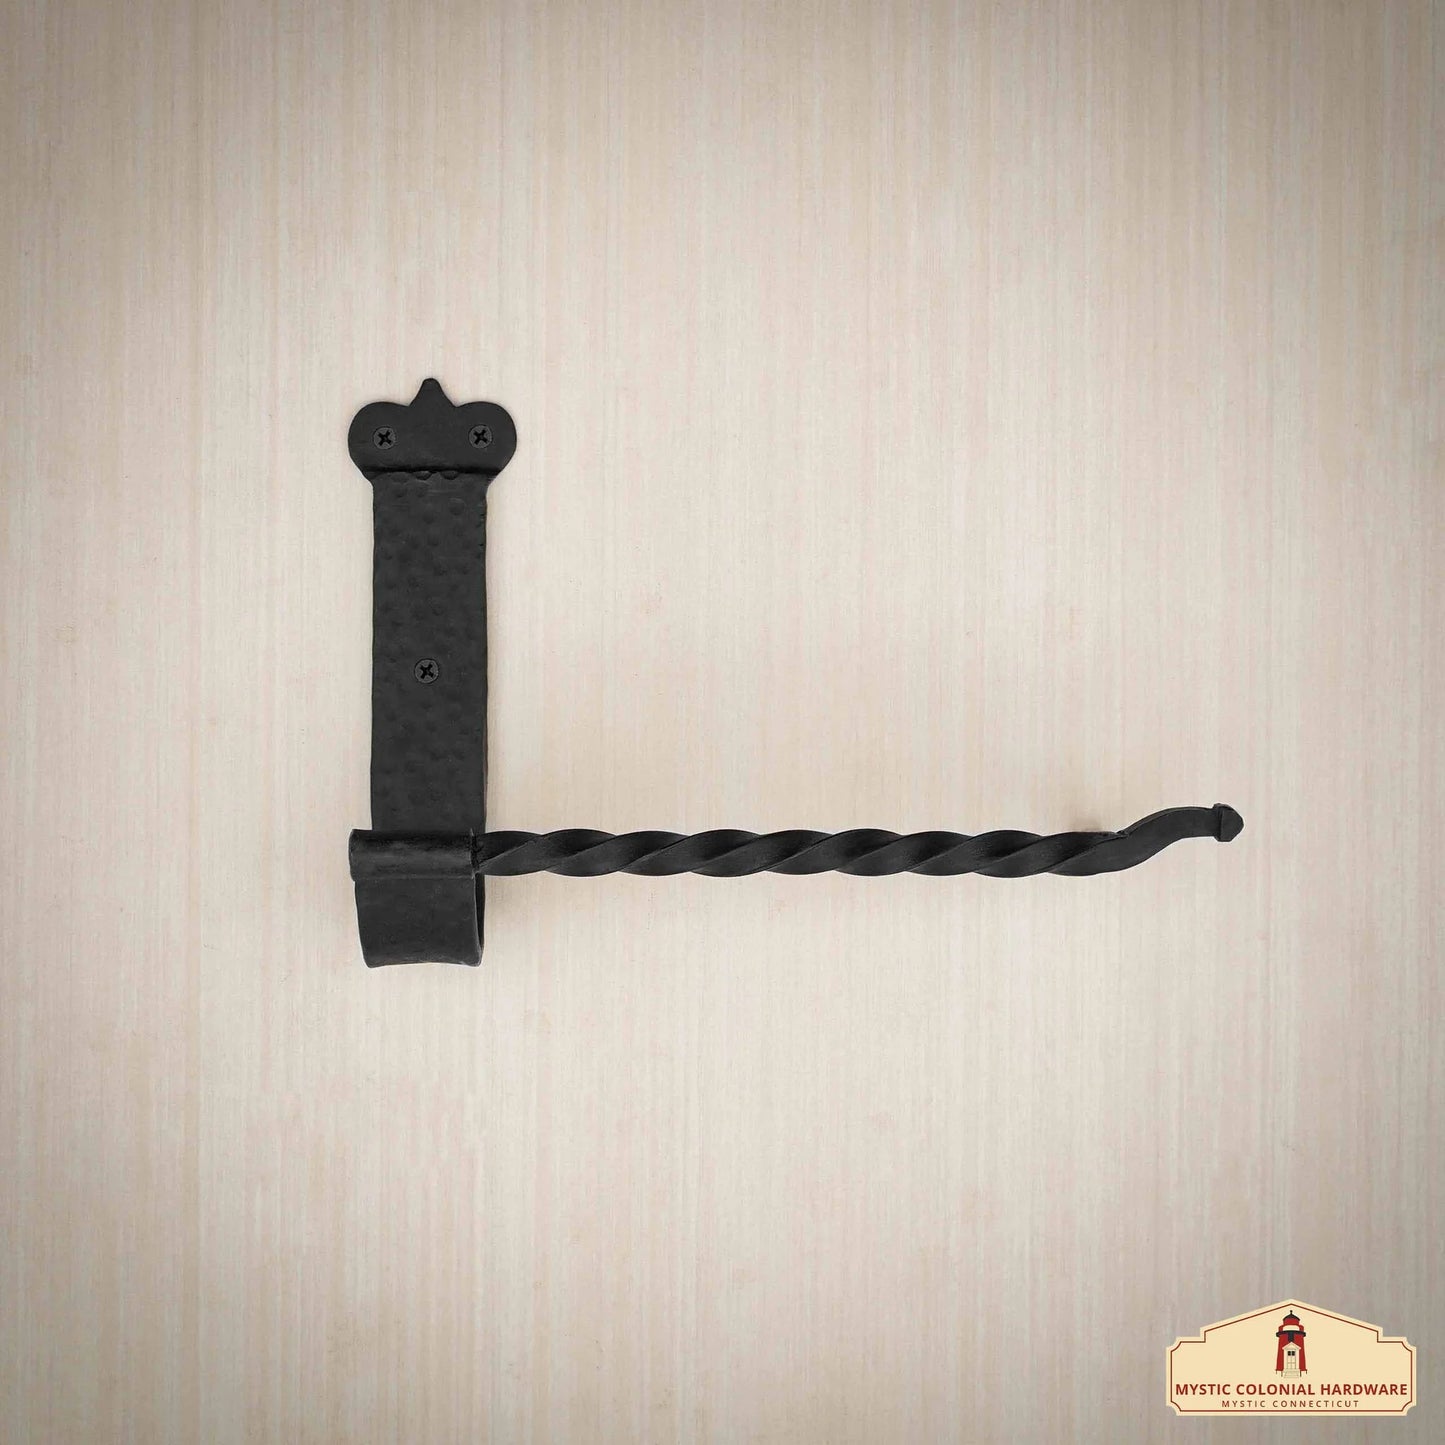 Wall Mounting Paper Towel Hanger: Ideal for a Modern Medieval Bathroom